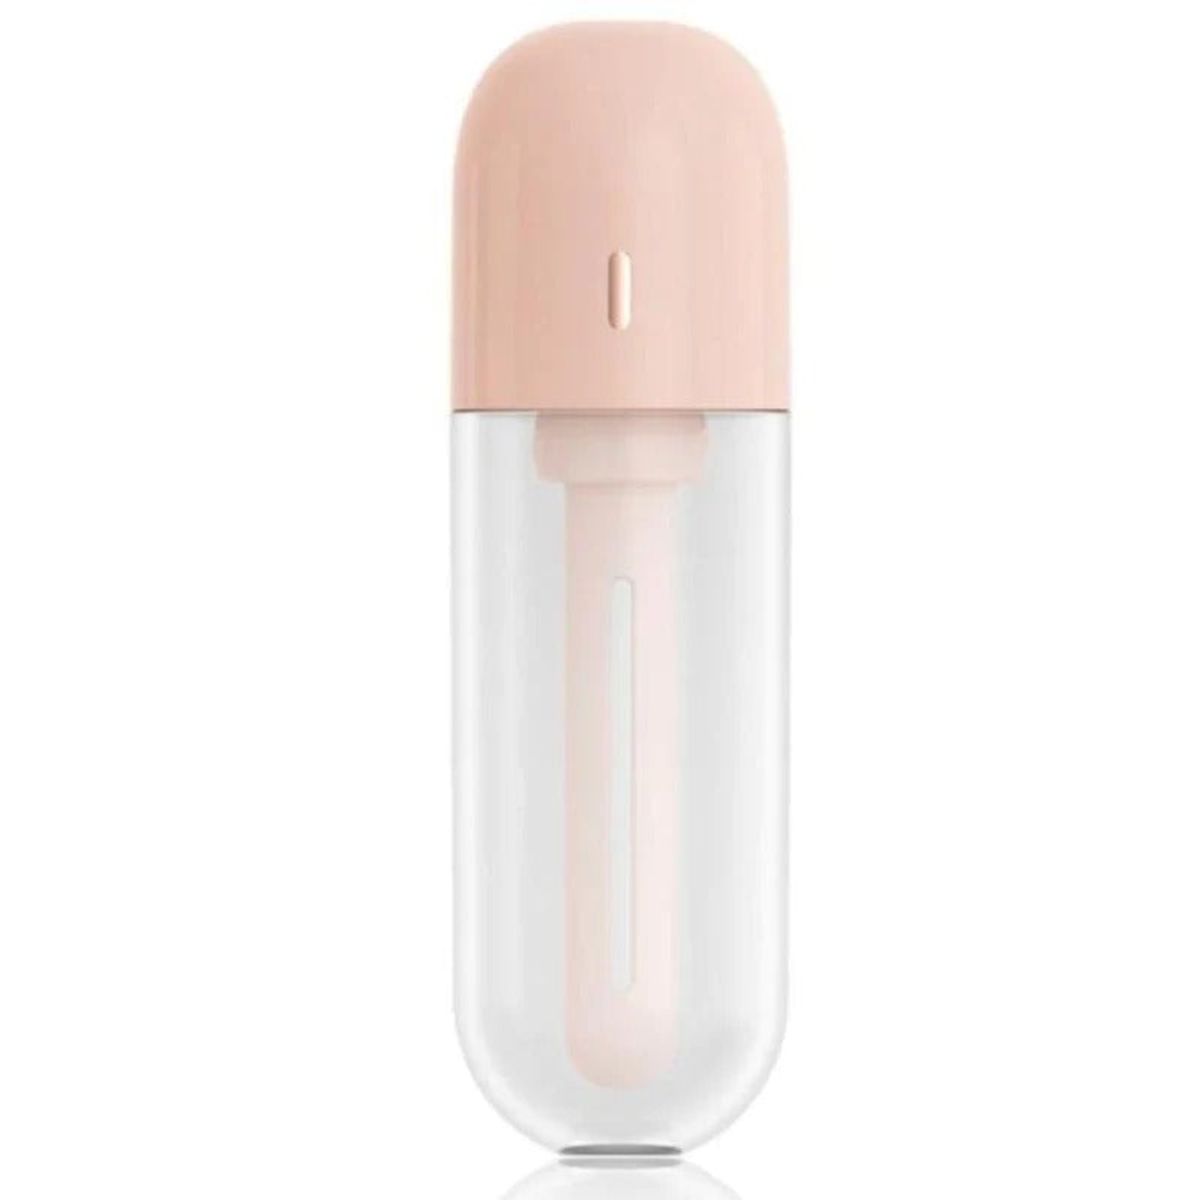 Photos - Humidifier Multitasky Anywhere Portable Bottle  by Multitasky™ - Pink MT-H